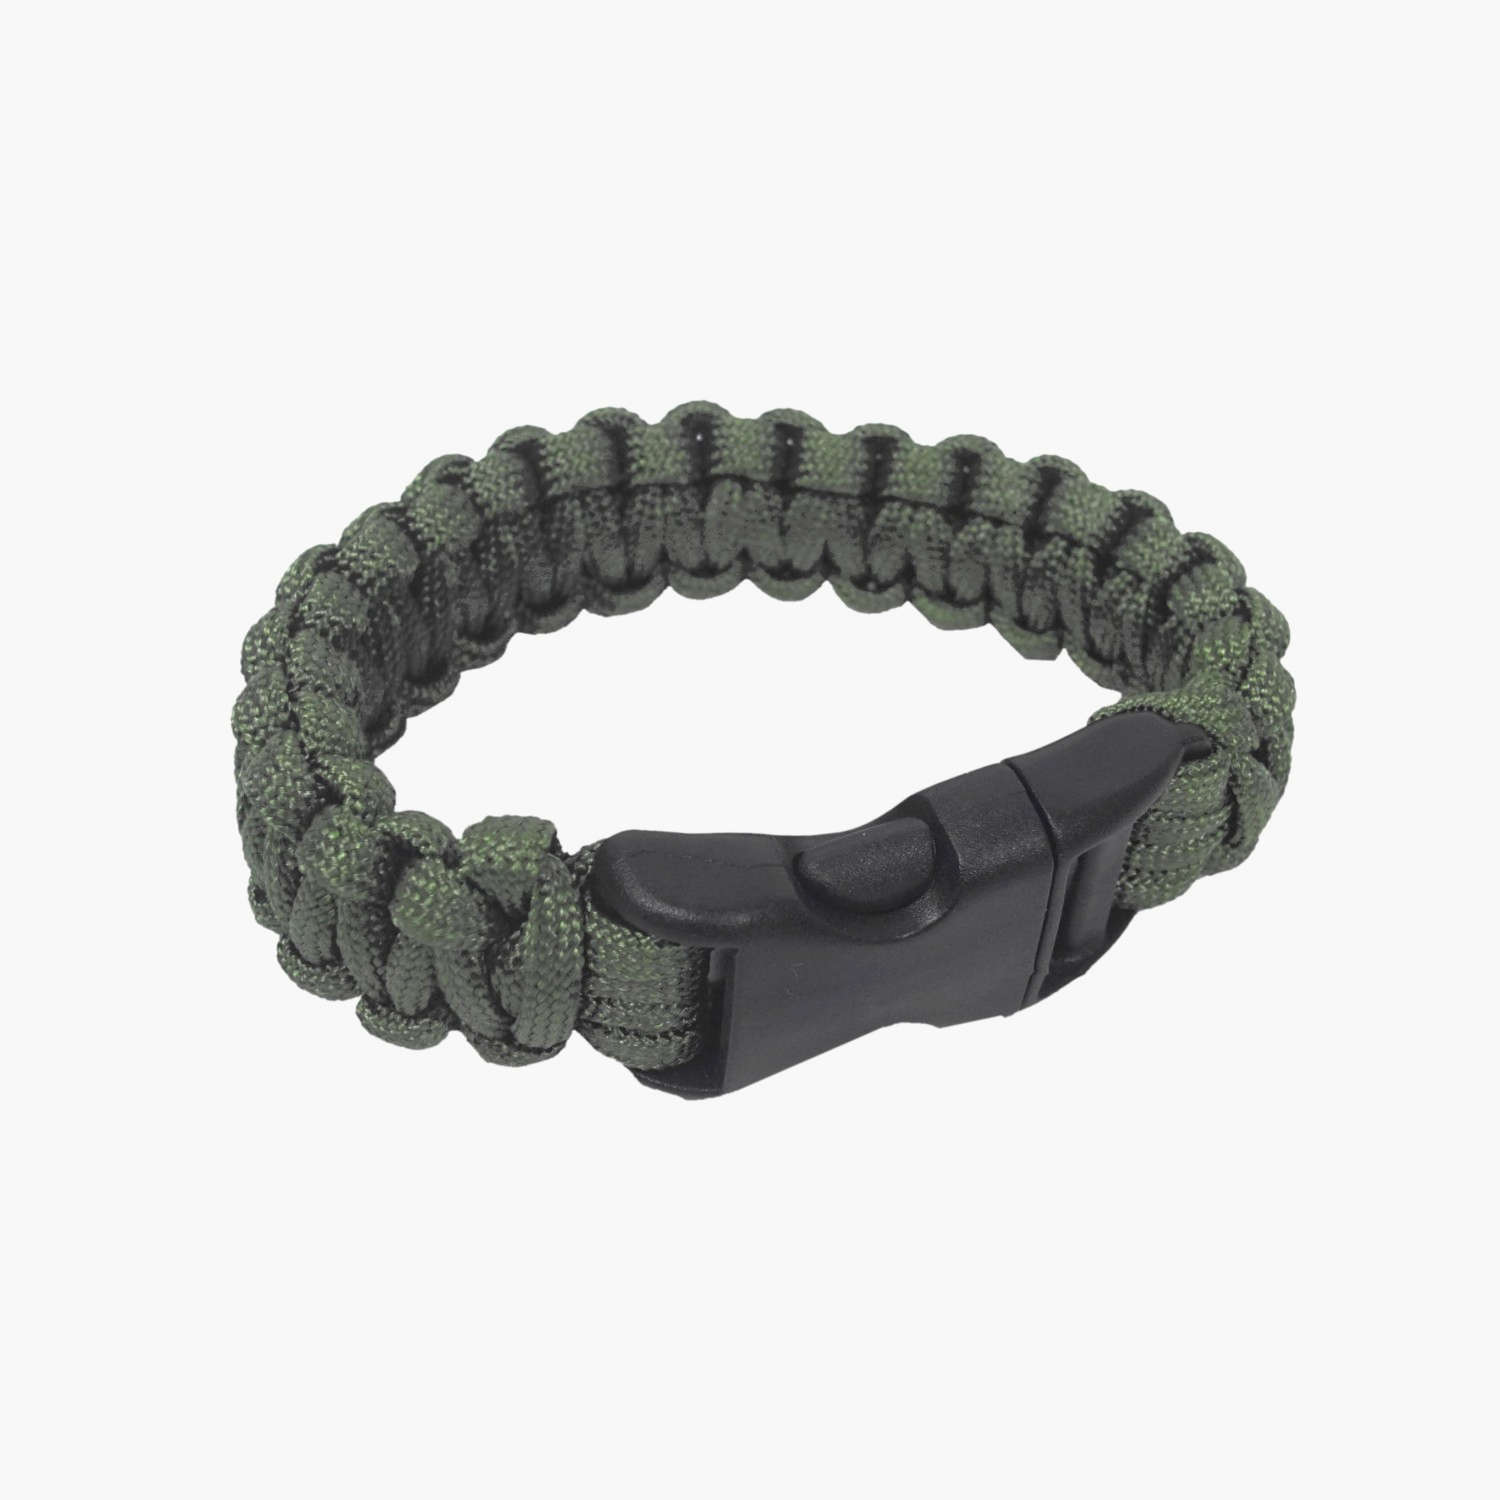 What is Paracord